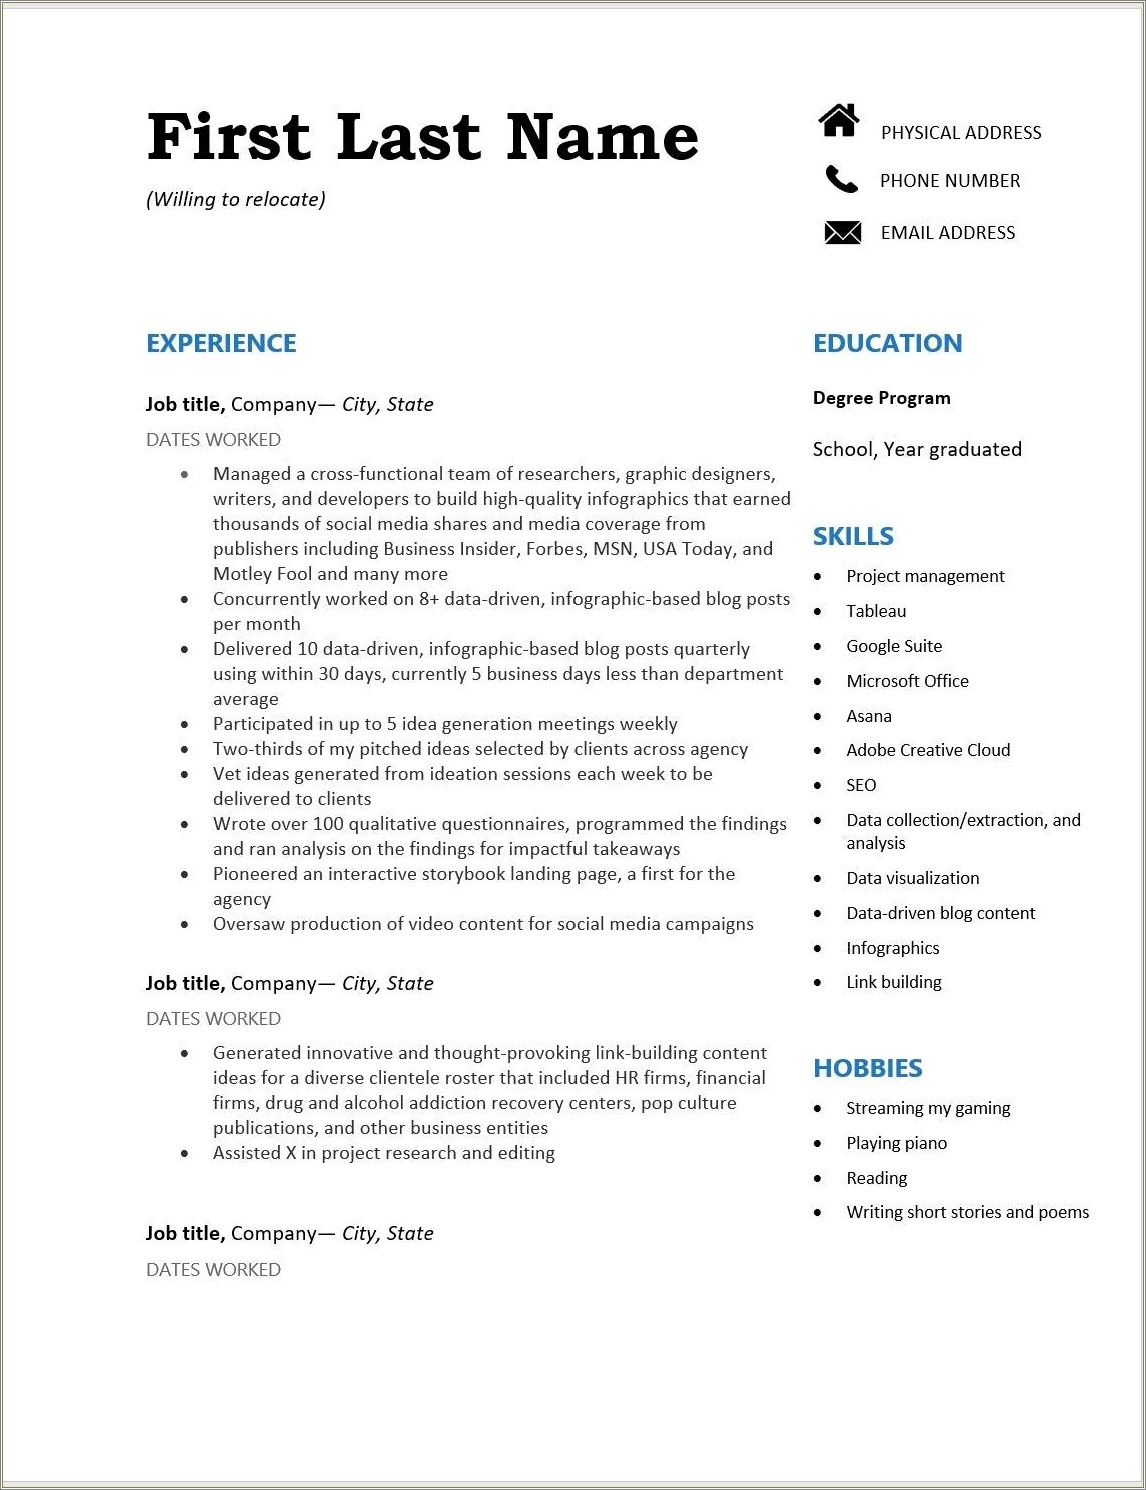 Does My Resume Need To Include All Jobs